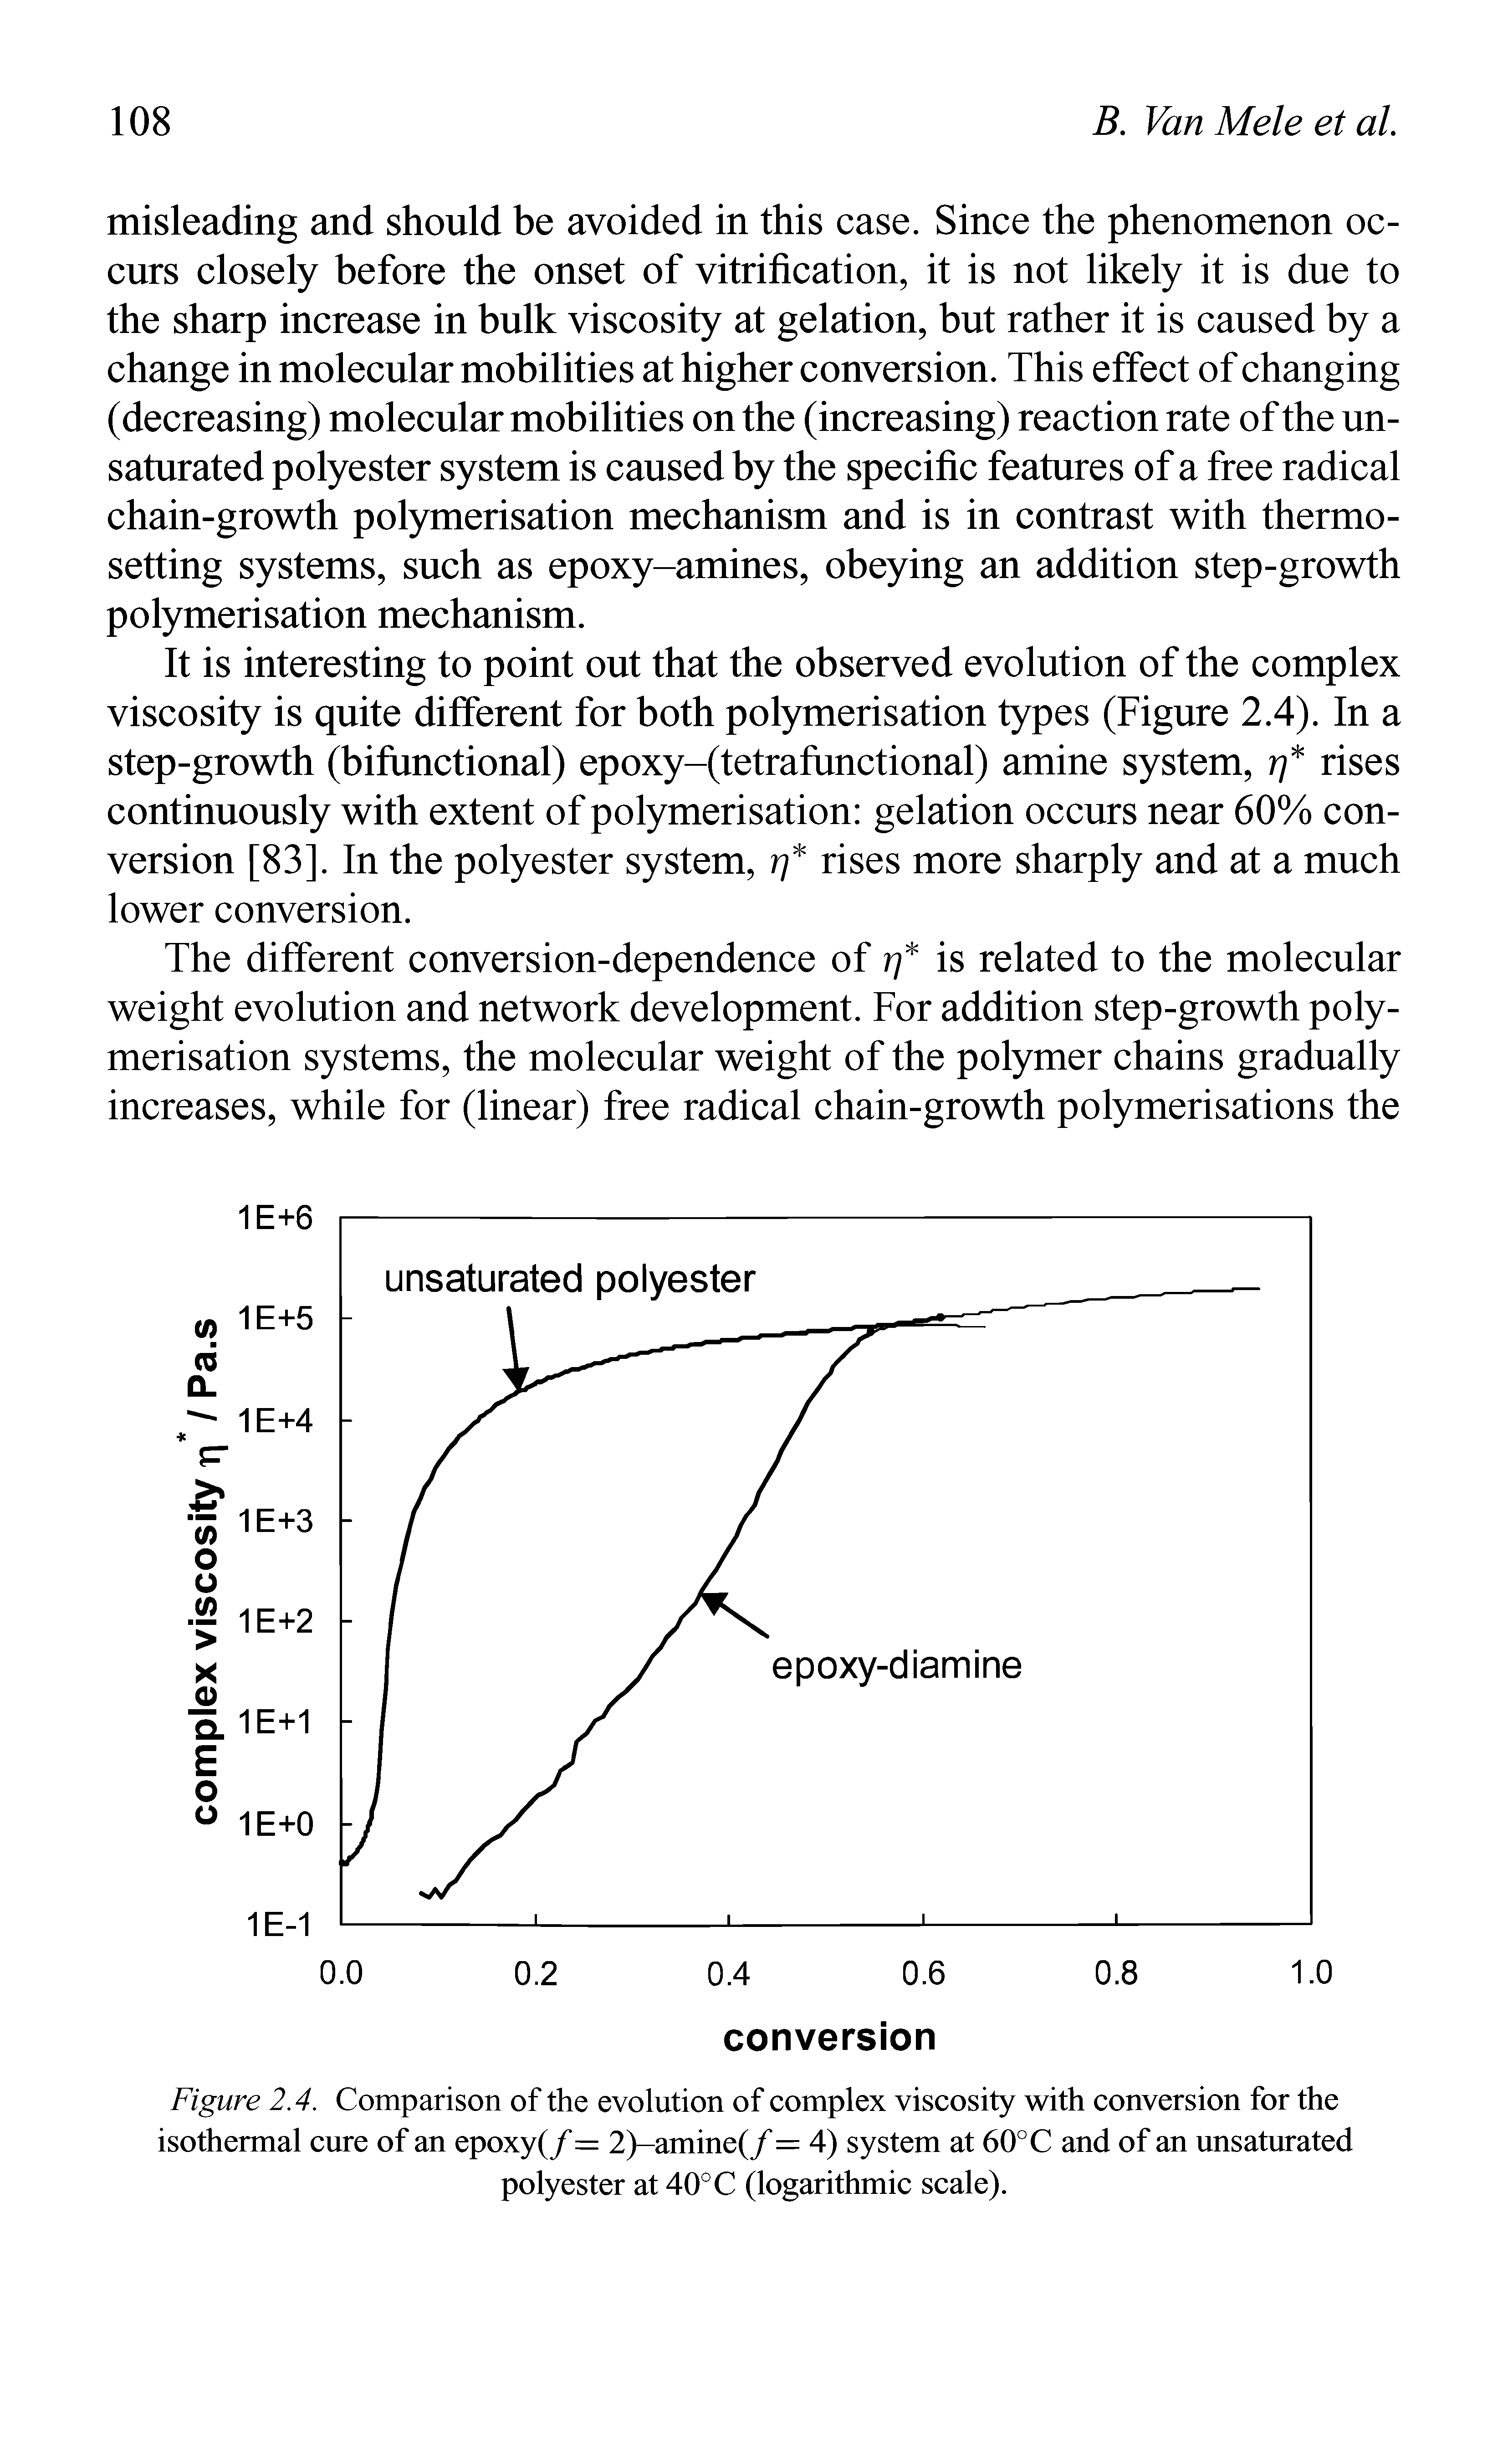 Figure 2.4. Comparison of the evolution of complex viscosity with conversion for the isothermal cure of an epoxy(/ = 2)-amine(/ = 4) system at 60° C and of an unsaturated polyester at 40°C (logarithmic scale).